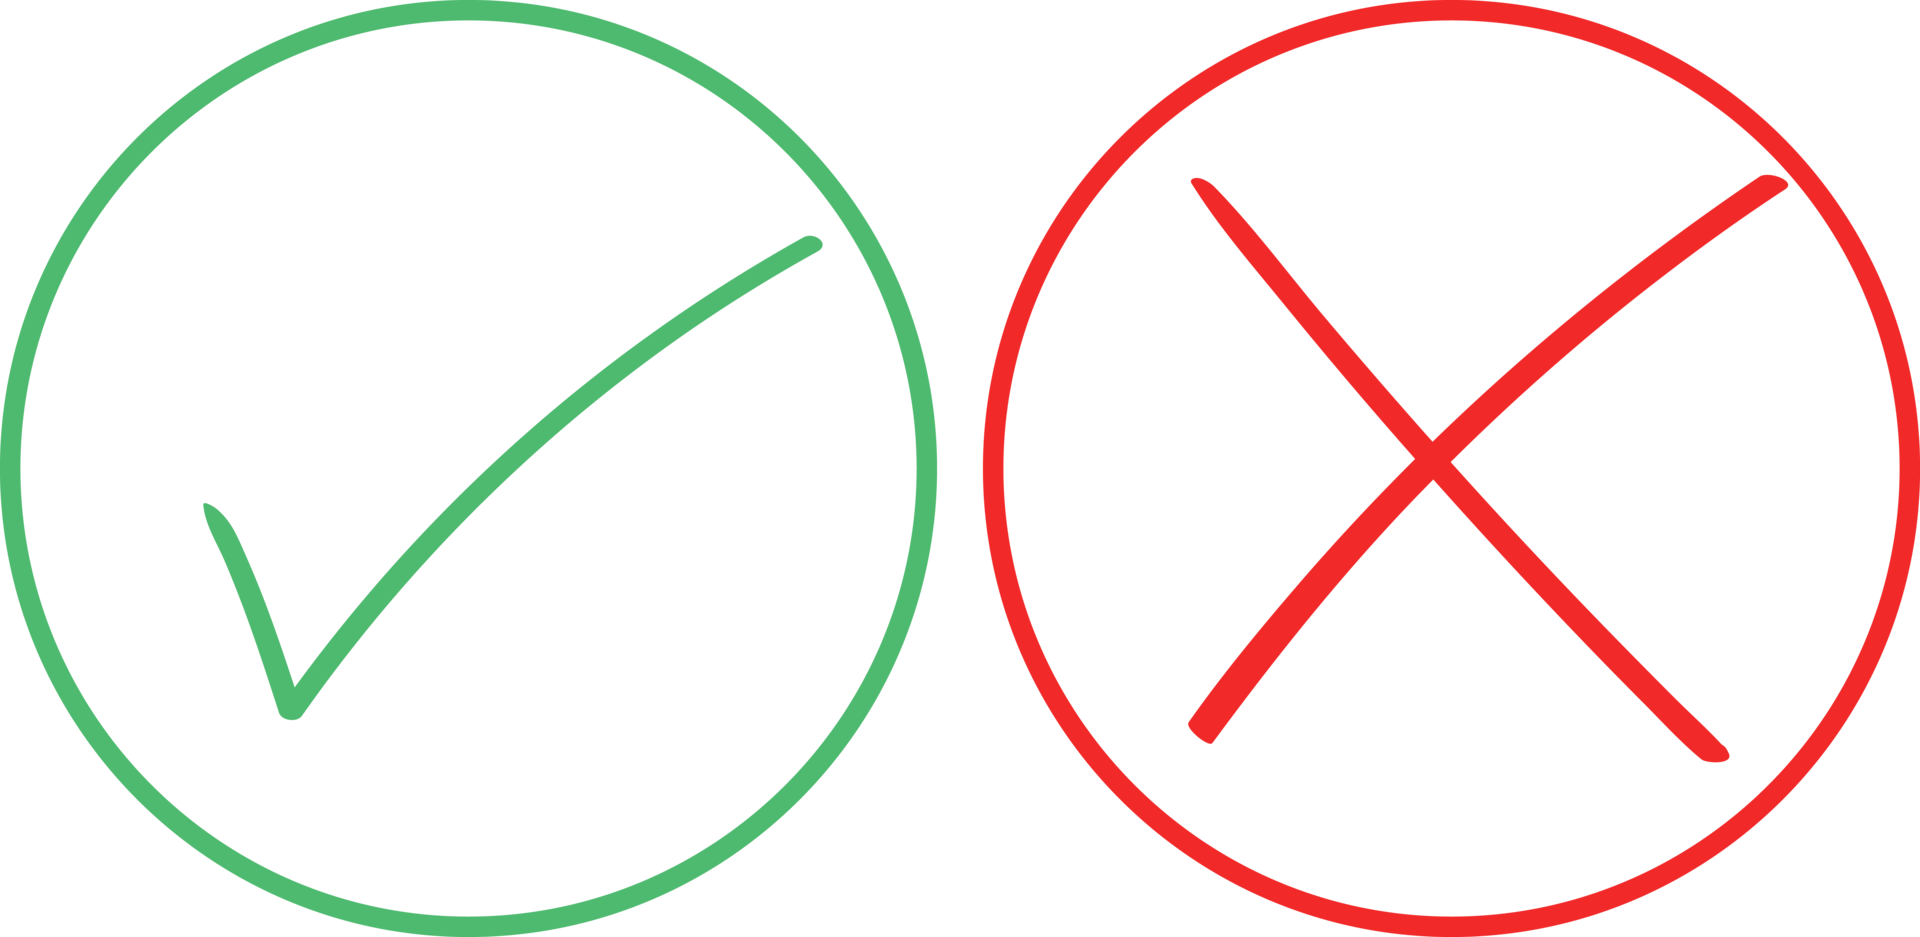 Thin line check mark icons. Green tick and red cross checkmarks